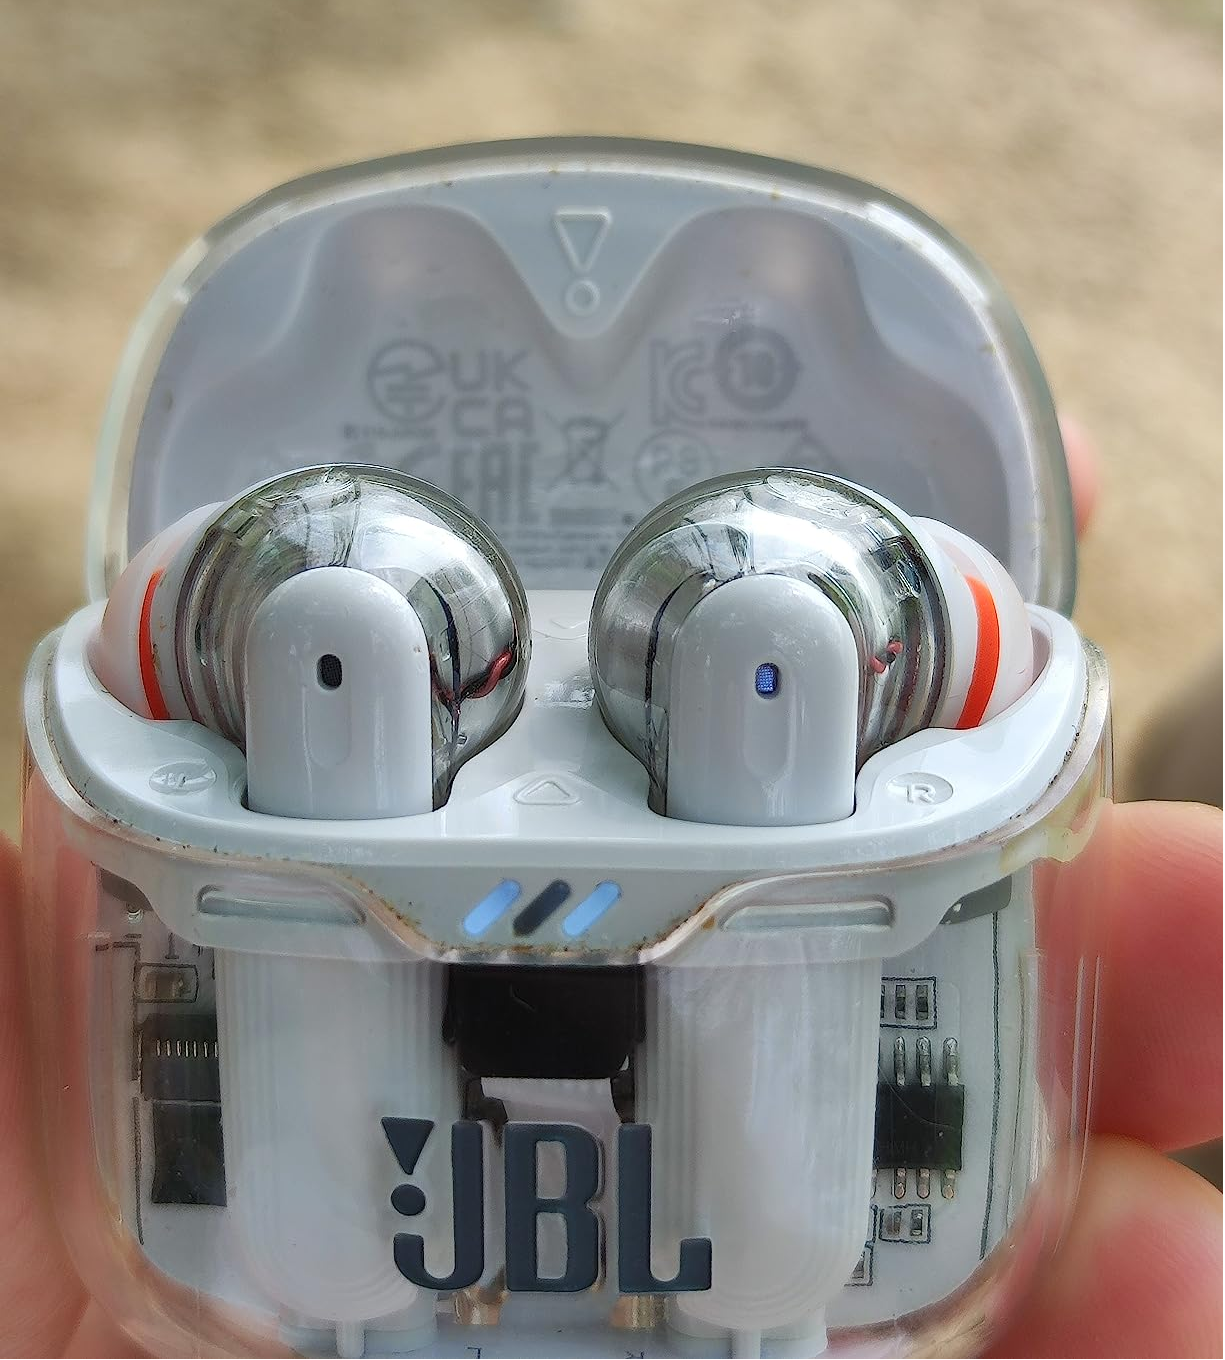 JBL Tune Flex are wireless earbuds that let you fine-tune the audio quality